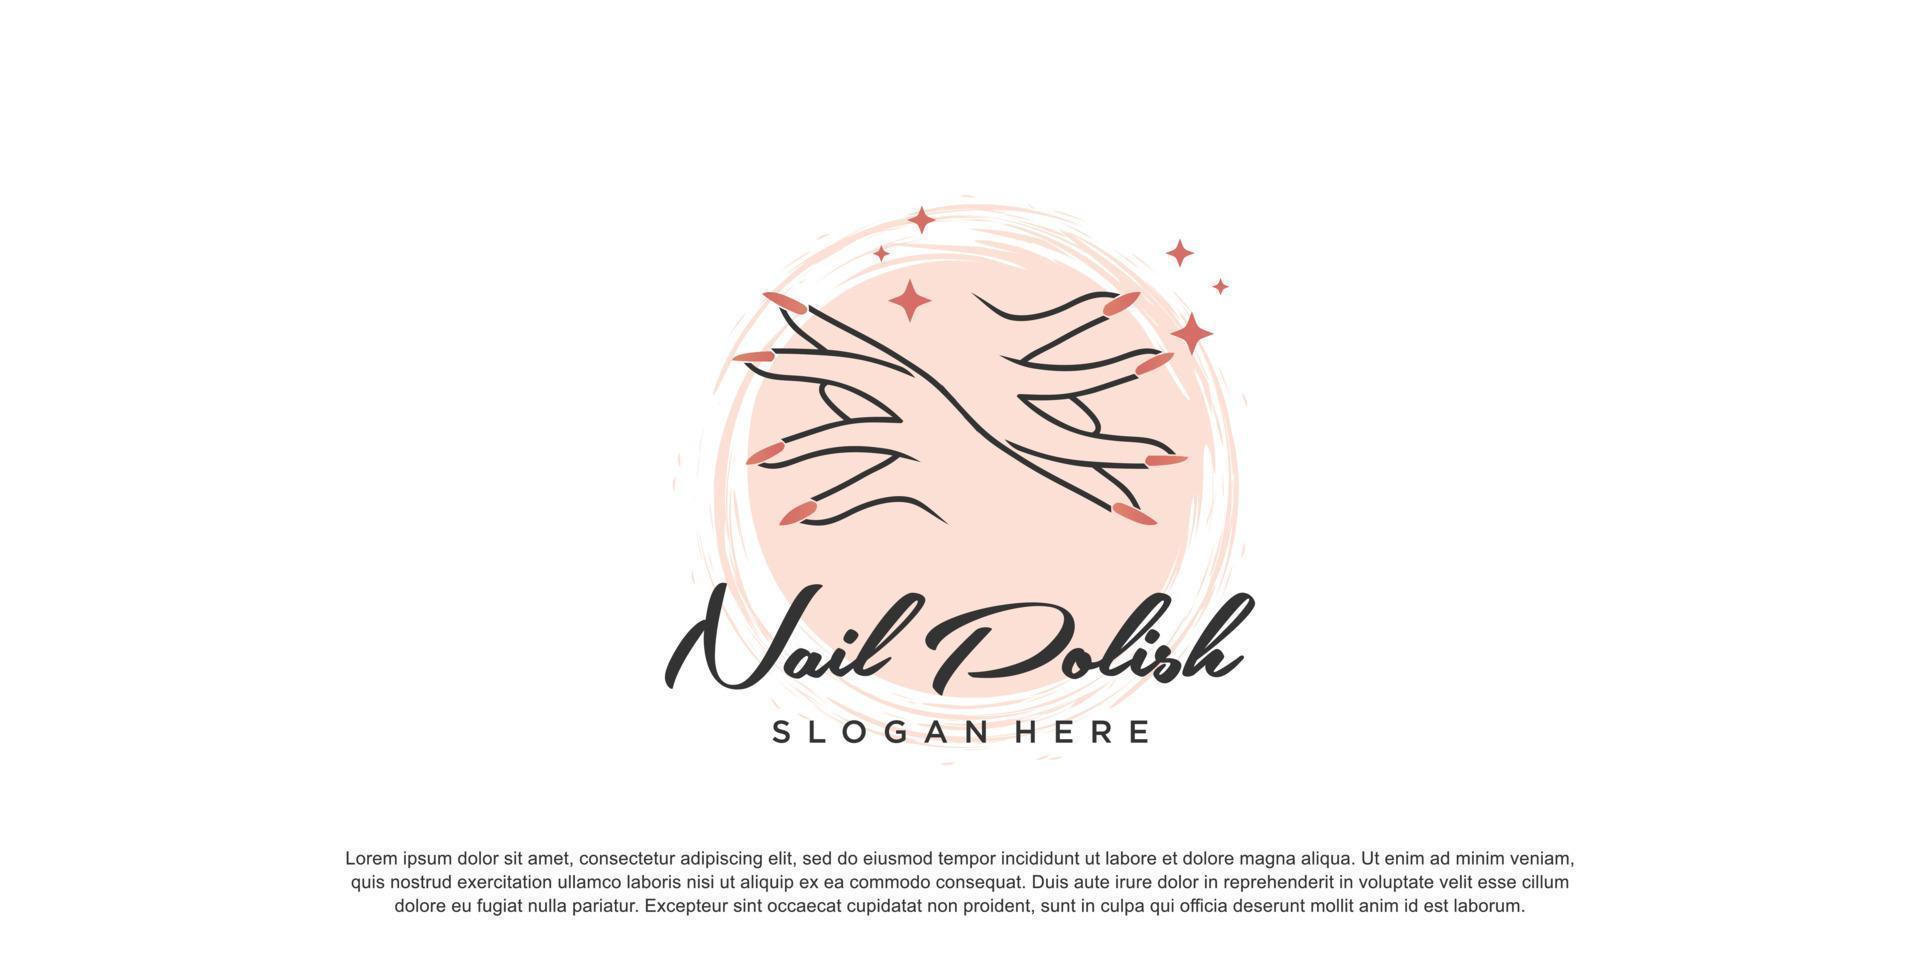 Nail logo design vector for beauty and care with unique concept